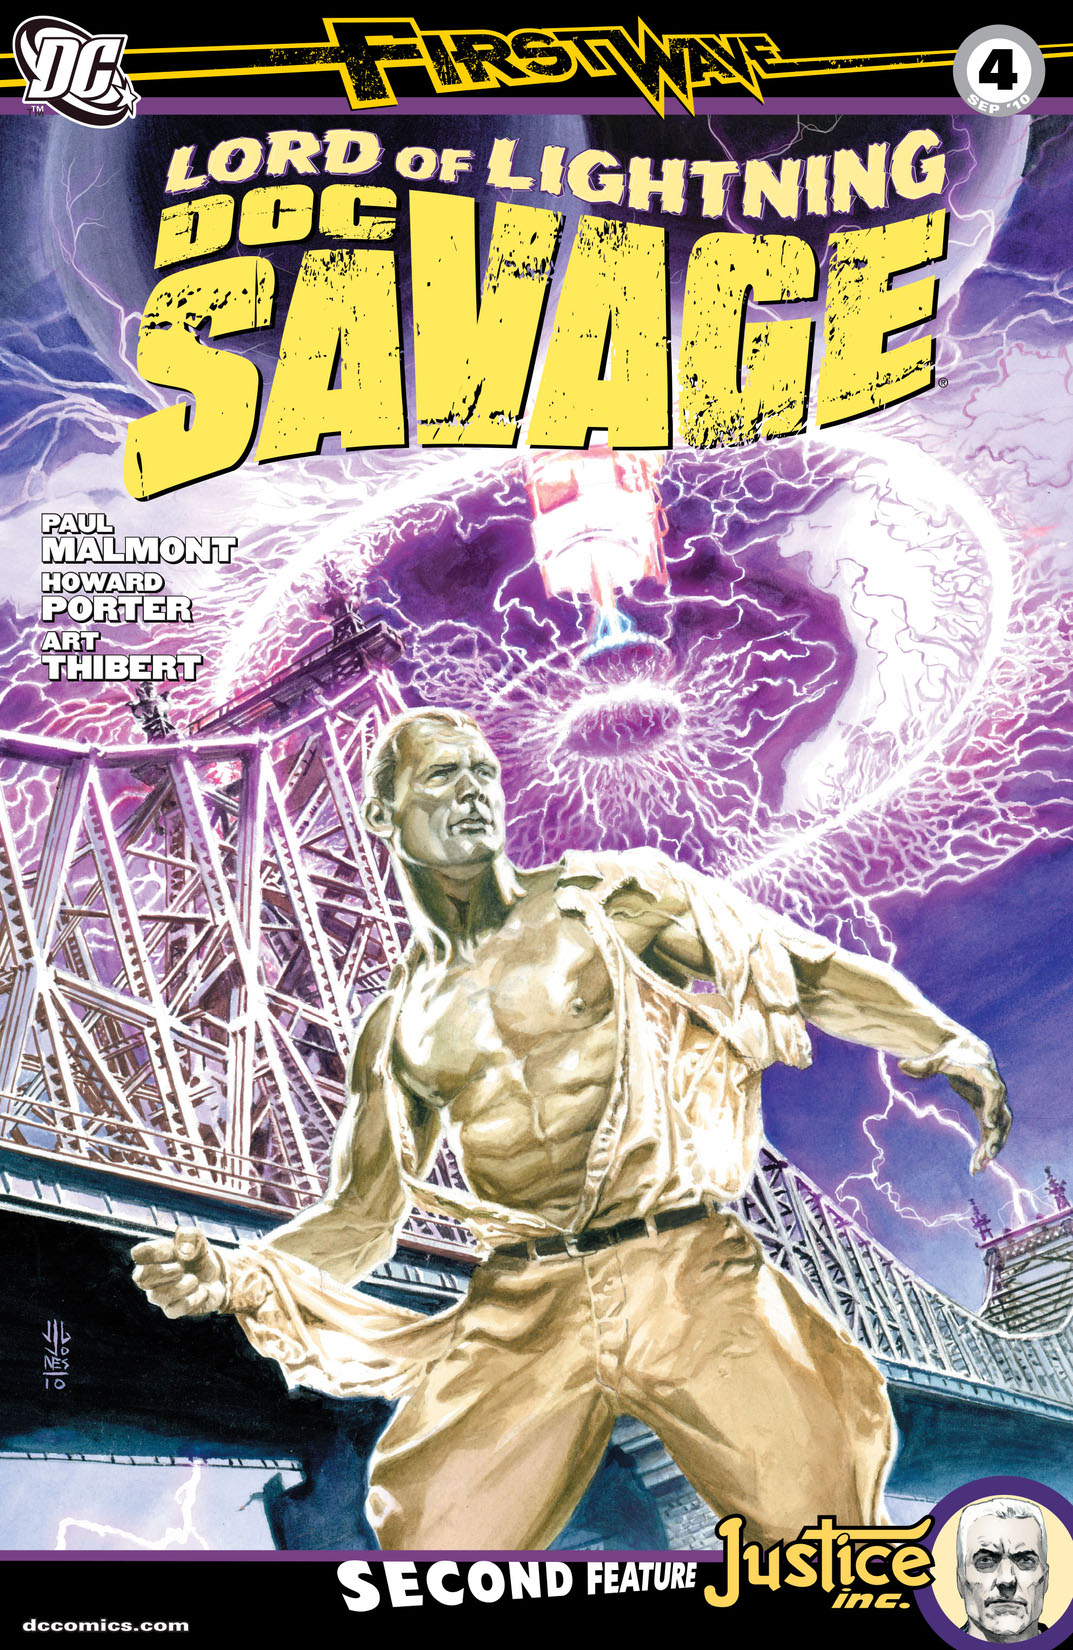 Doc Savage #4 preview images